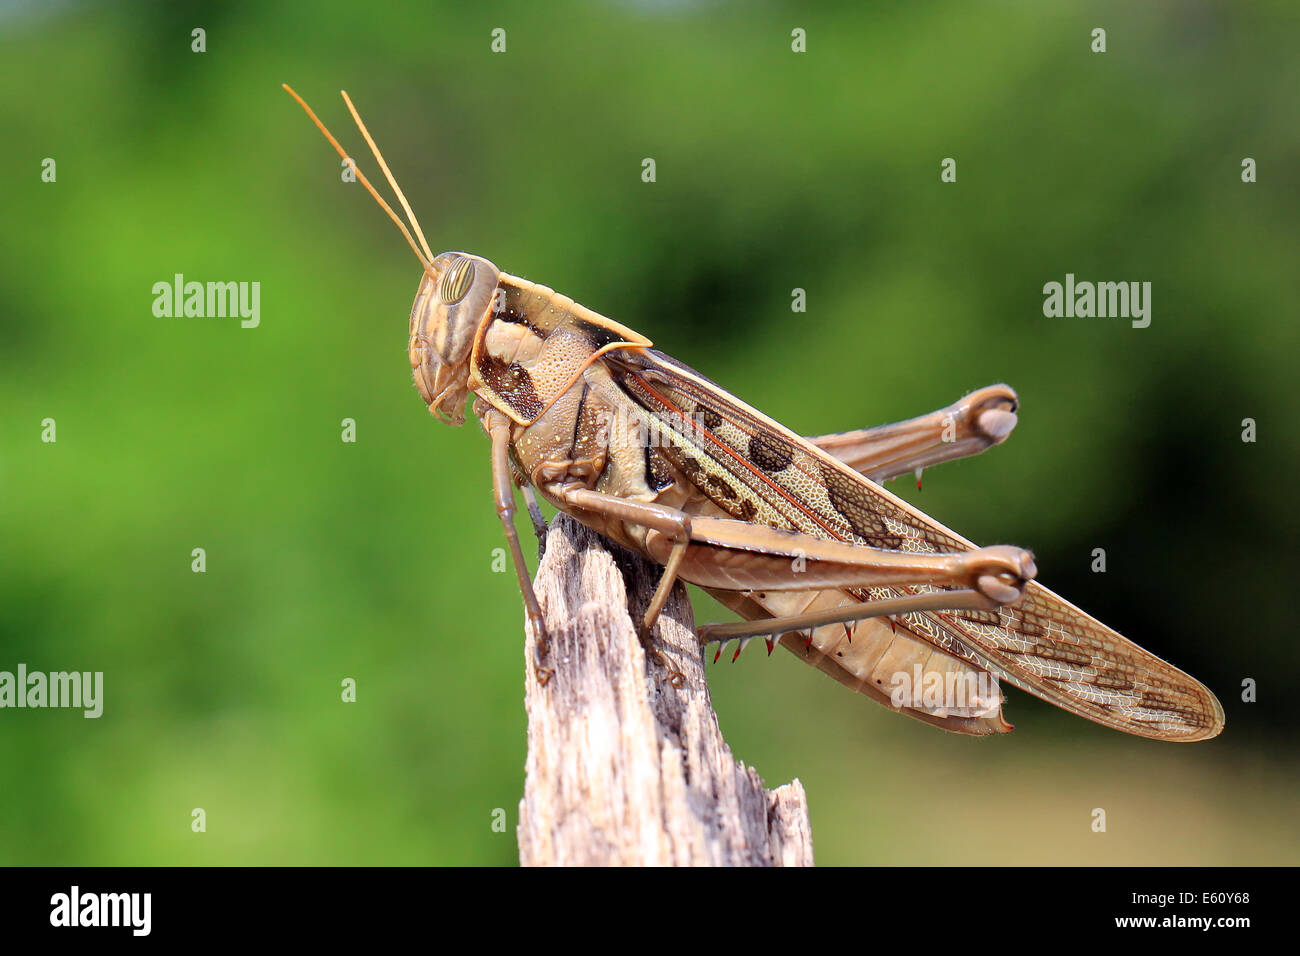 Grasshopper perching on natural background Stock Photo